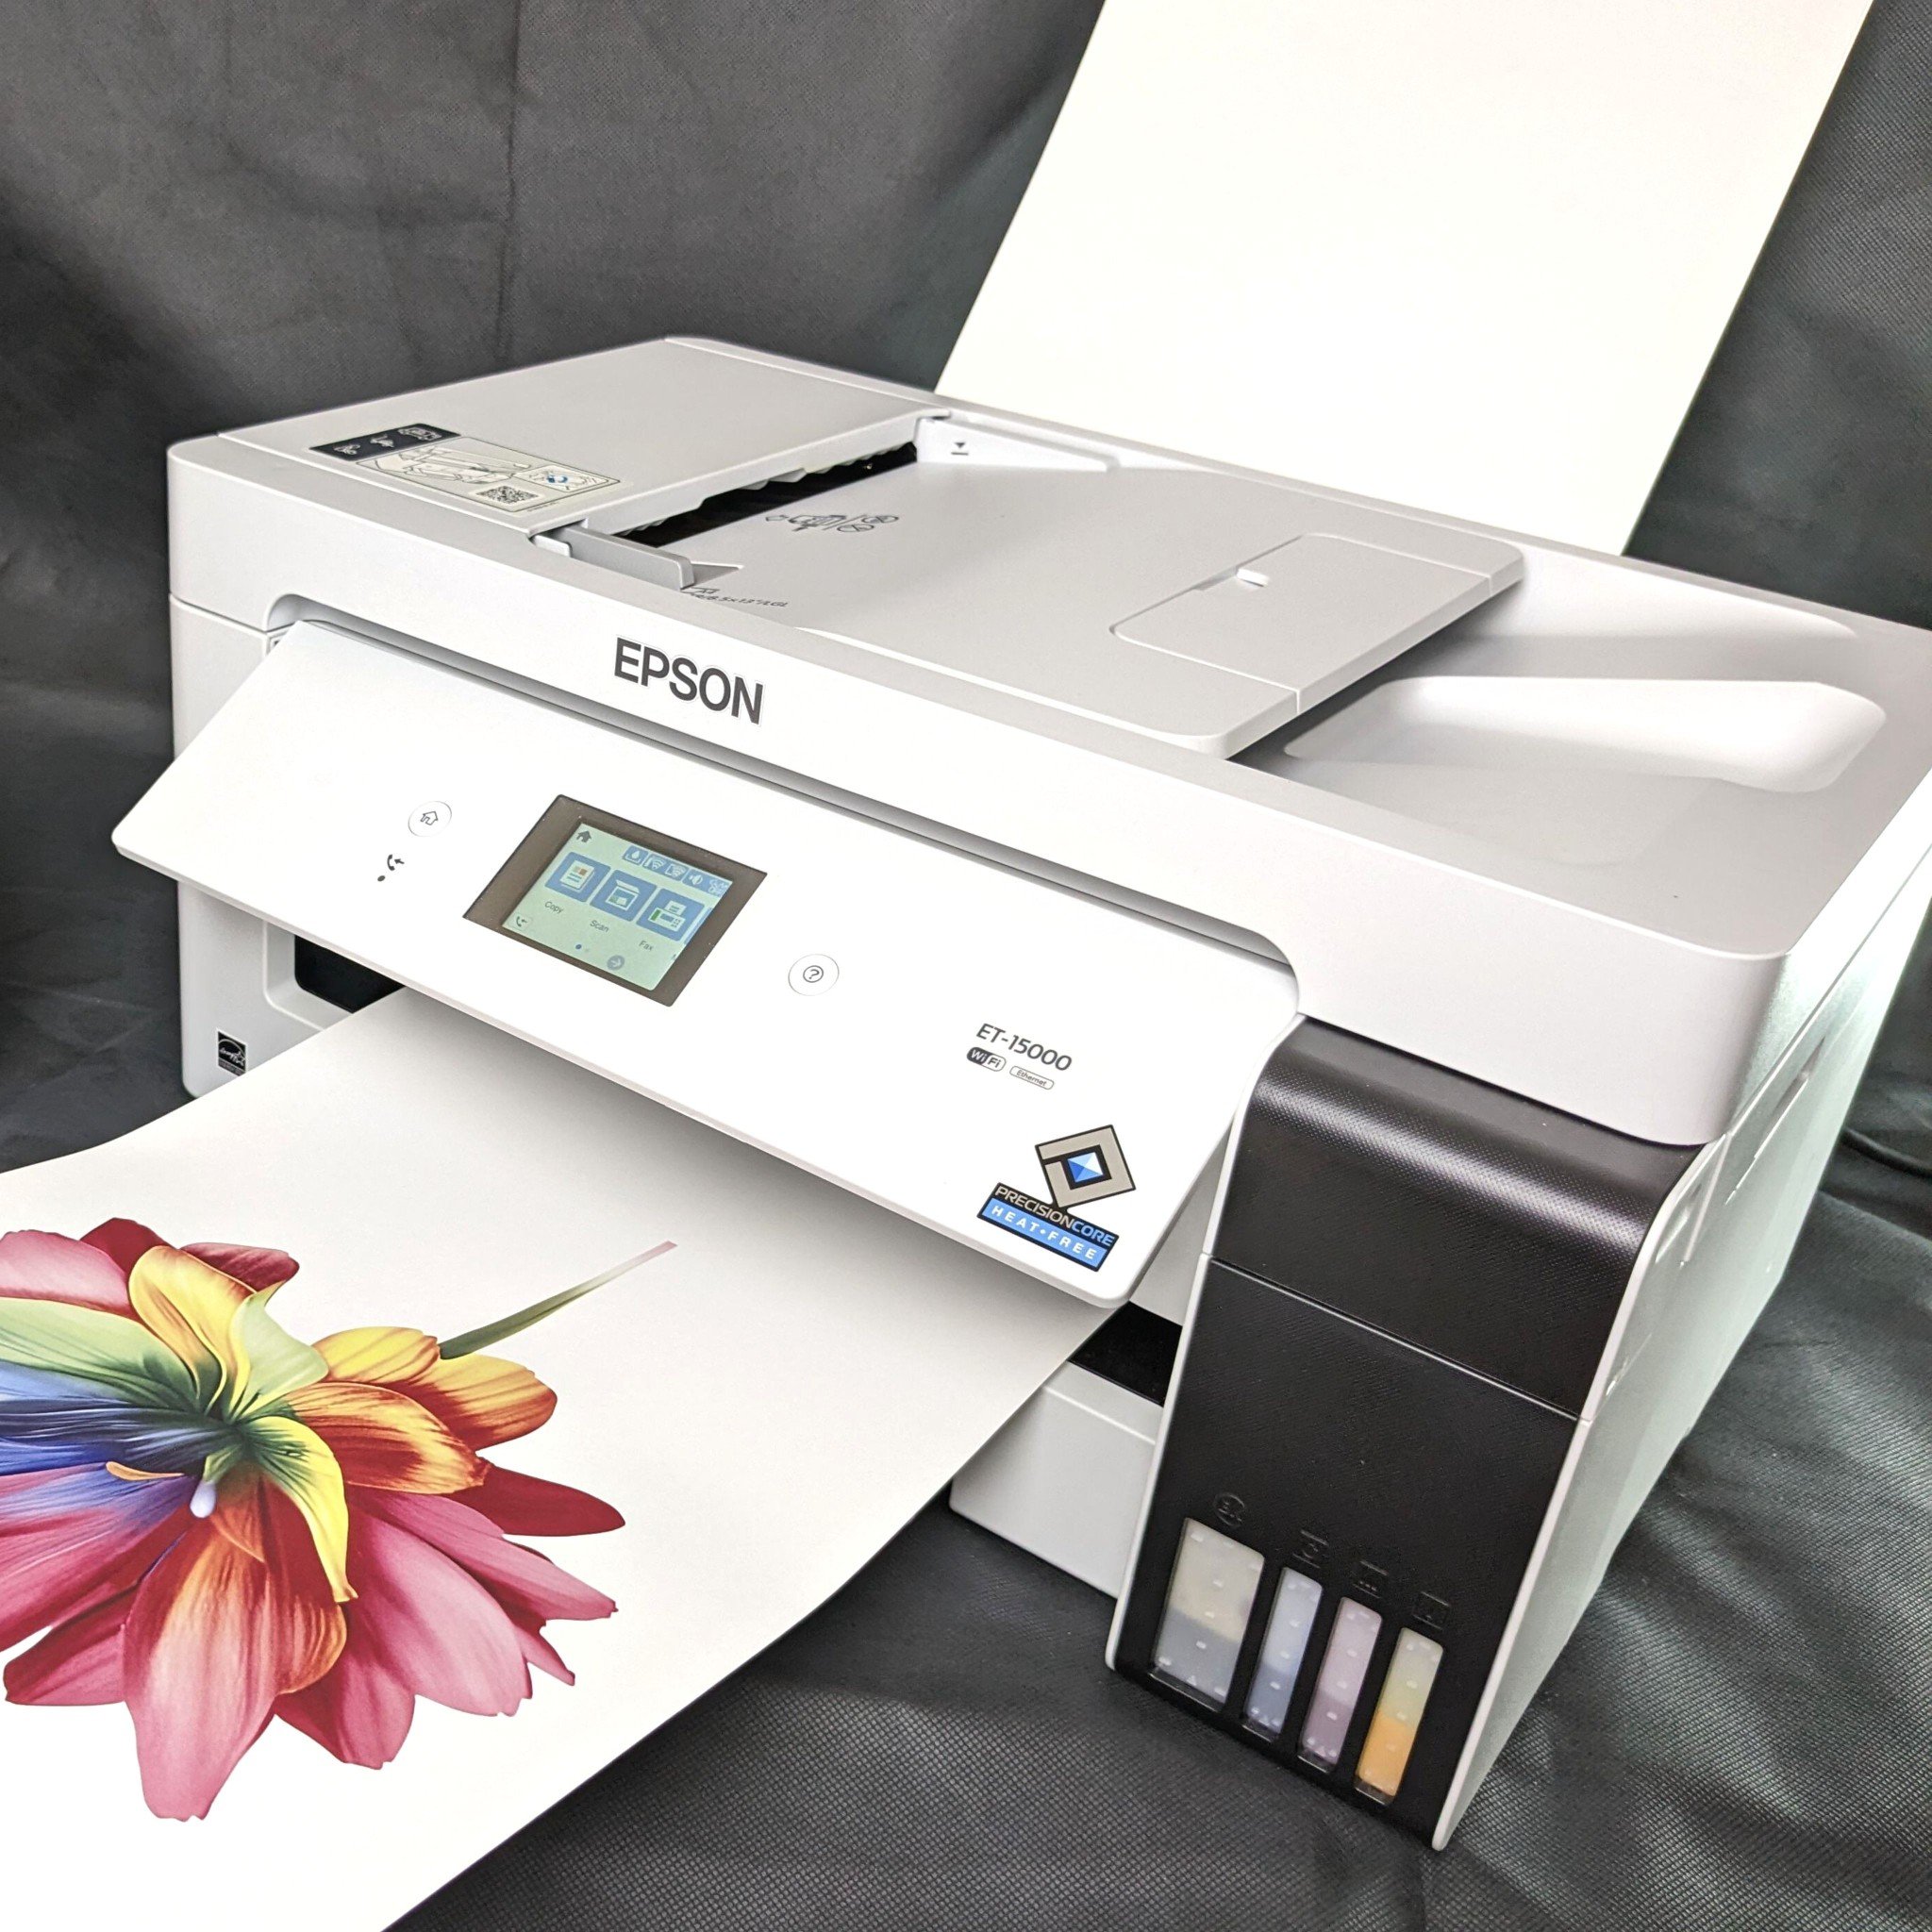 Large-format sublimation printer with image.